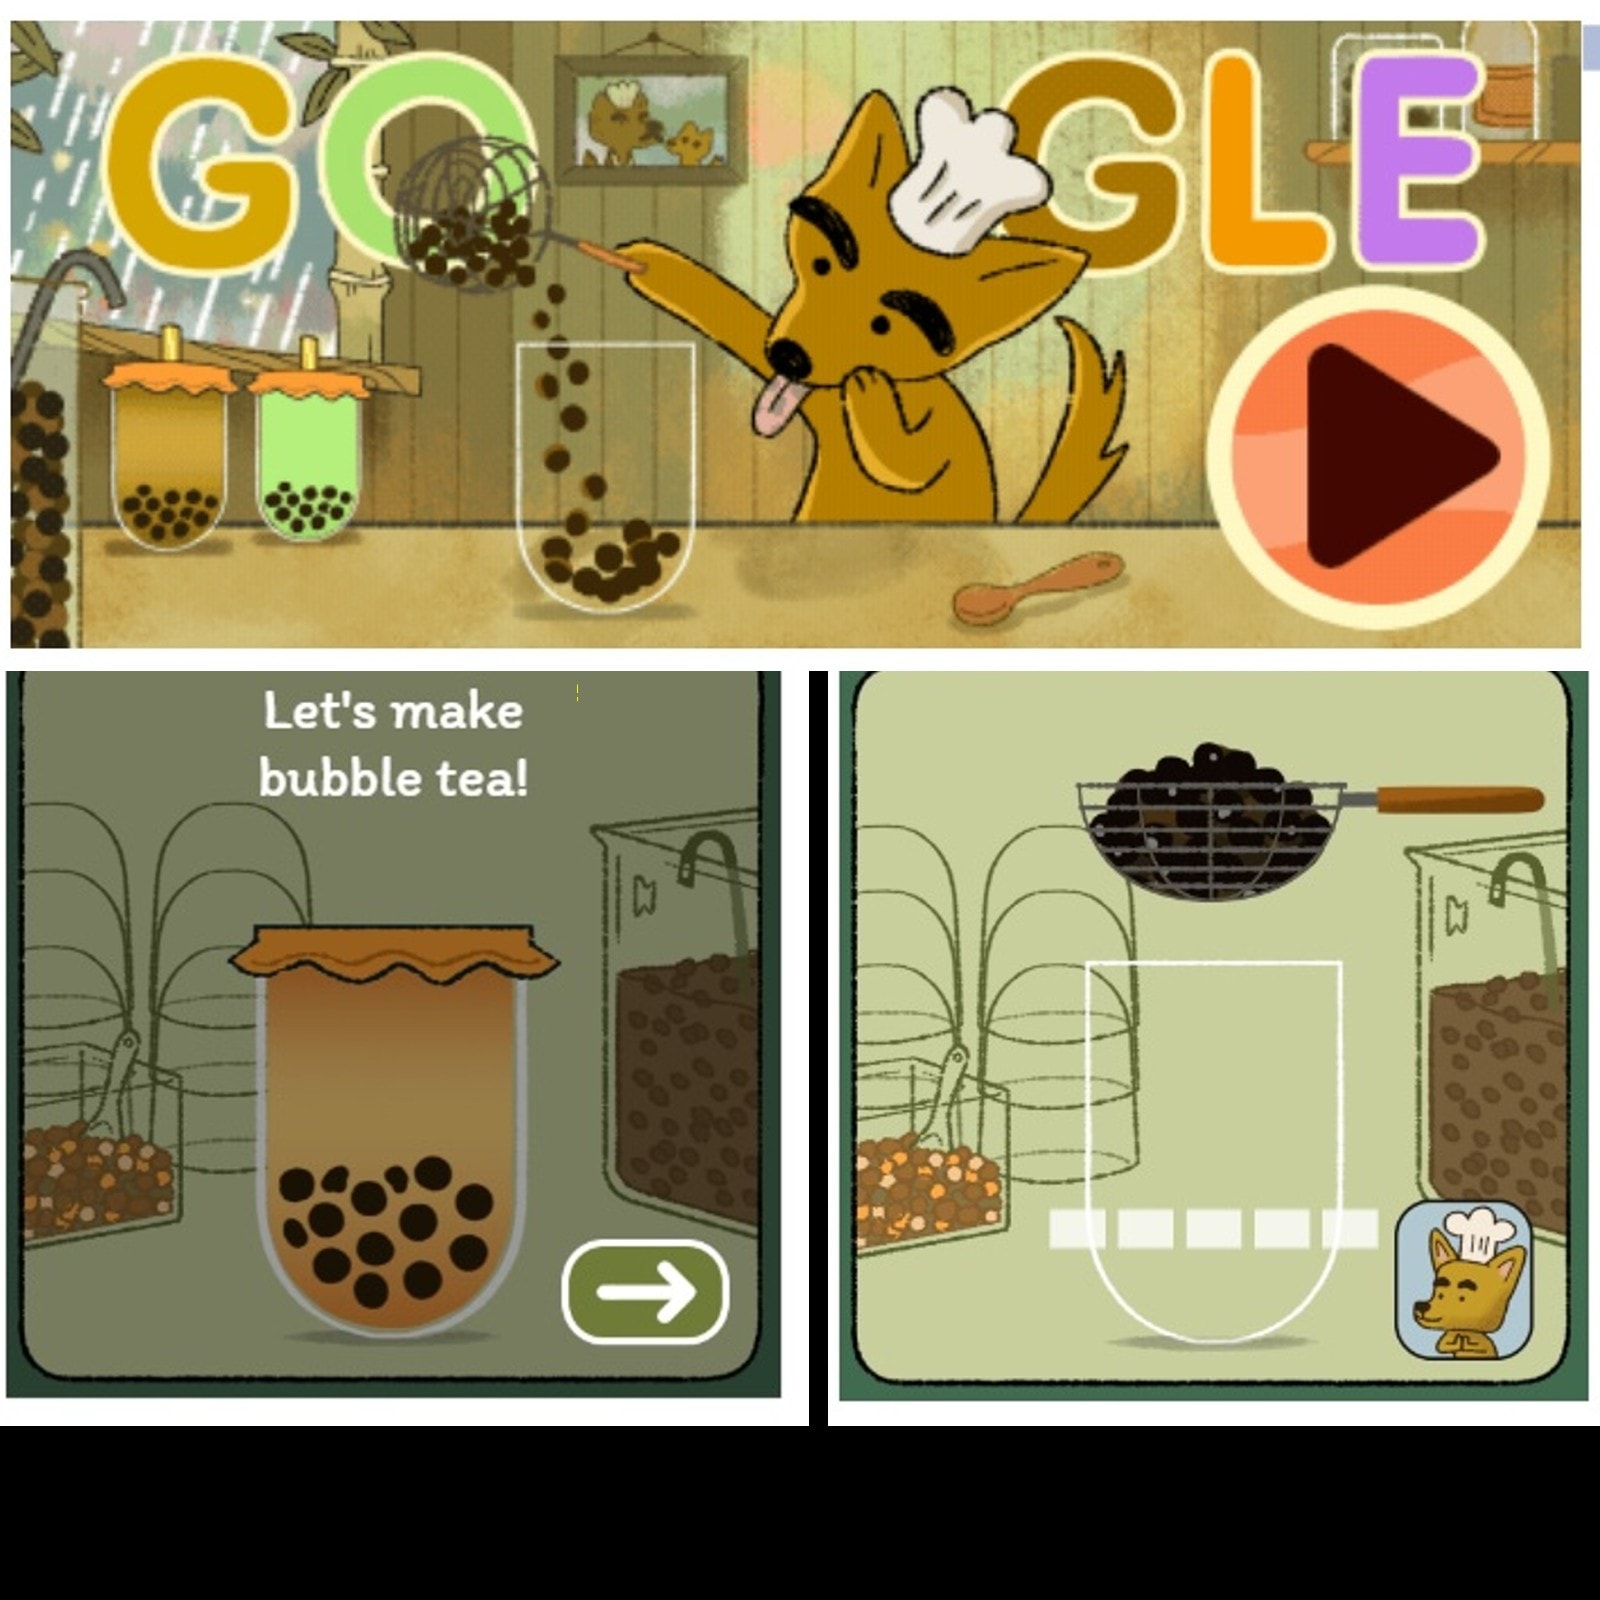 WATCH: Google Doodle Today Celebrates Bubble Tea With an Interactive Game -  News18